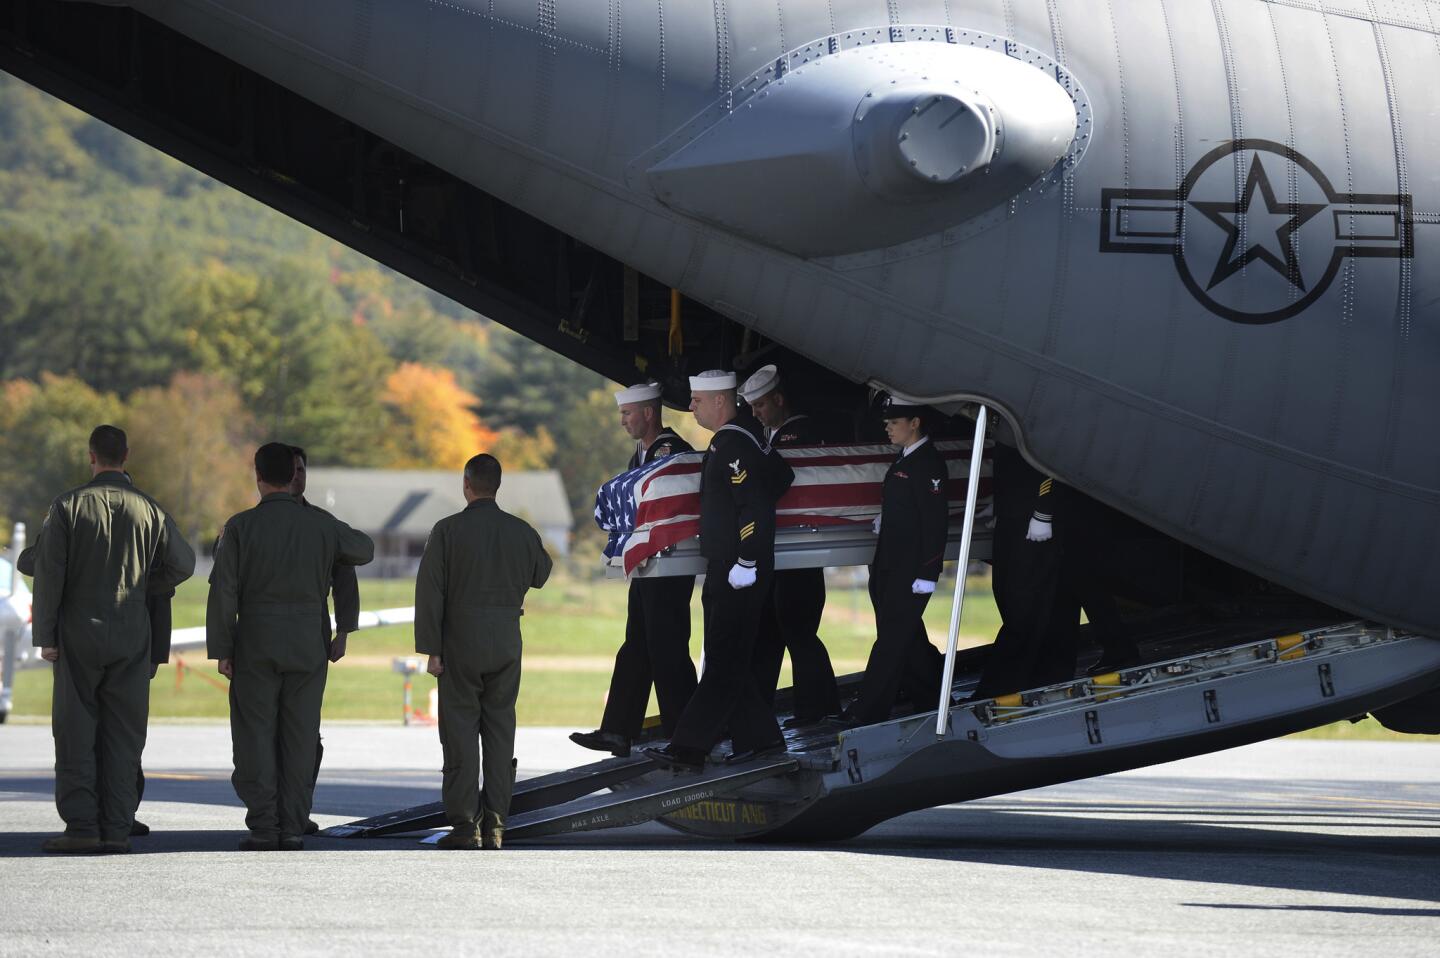 The remains of Navy Fireman 3rd Class Edwin Hopkins is carried off a C-130 military plane after being flown around the area in honor before landing at Dillant-Hopkins Airport in Keene, N.H. Hopkins died during the Japanese attack on Pearl Harbor on Dec. 7, 1941.